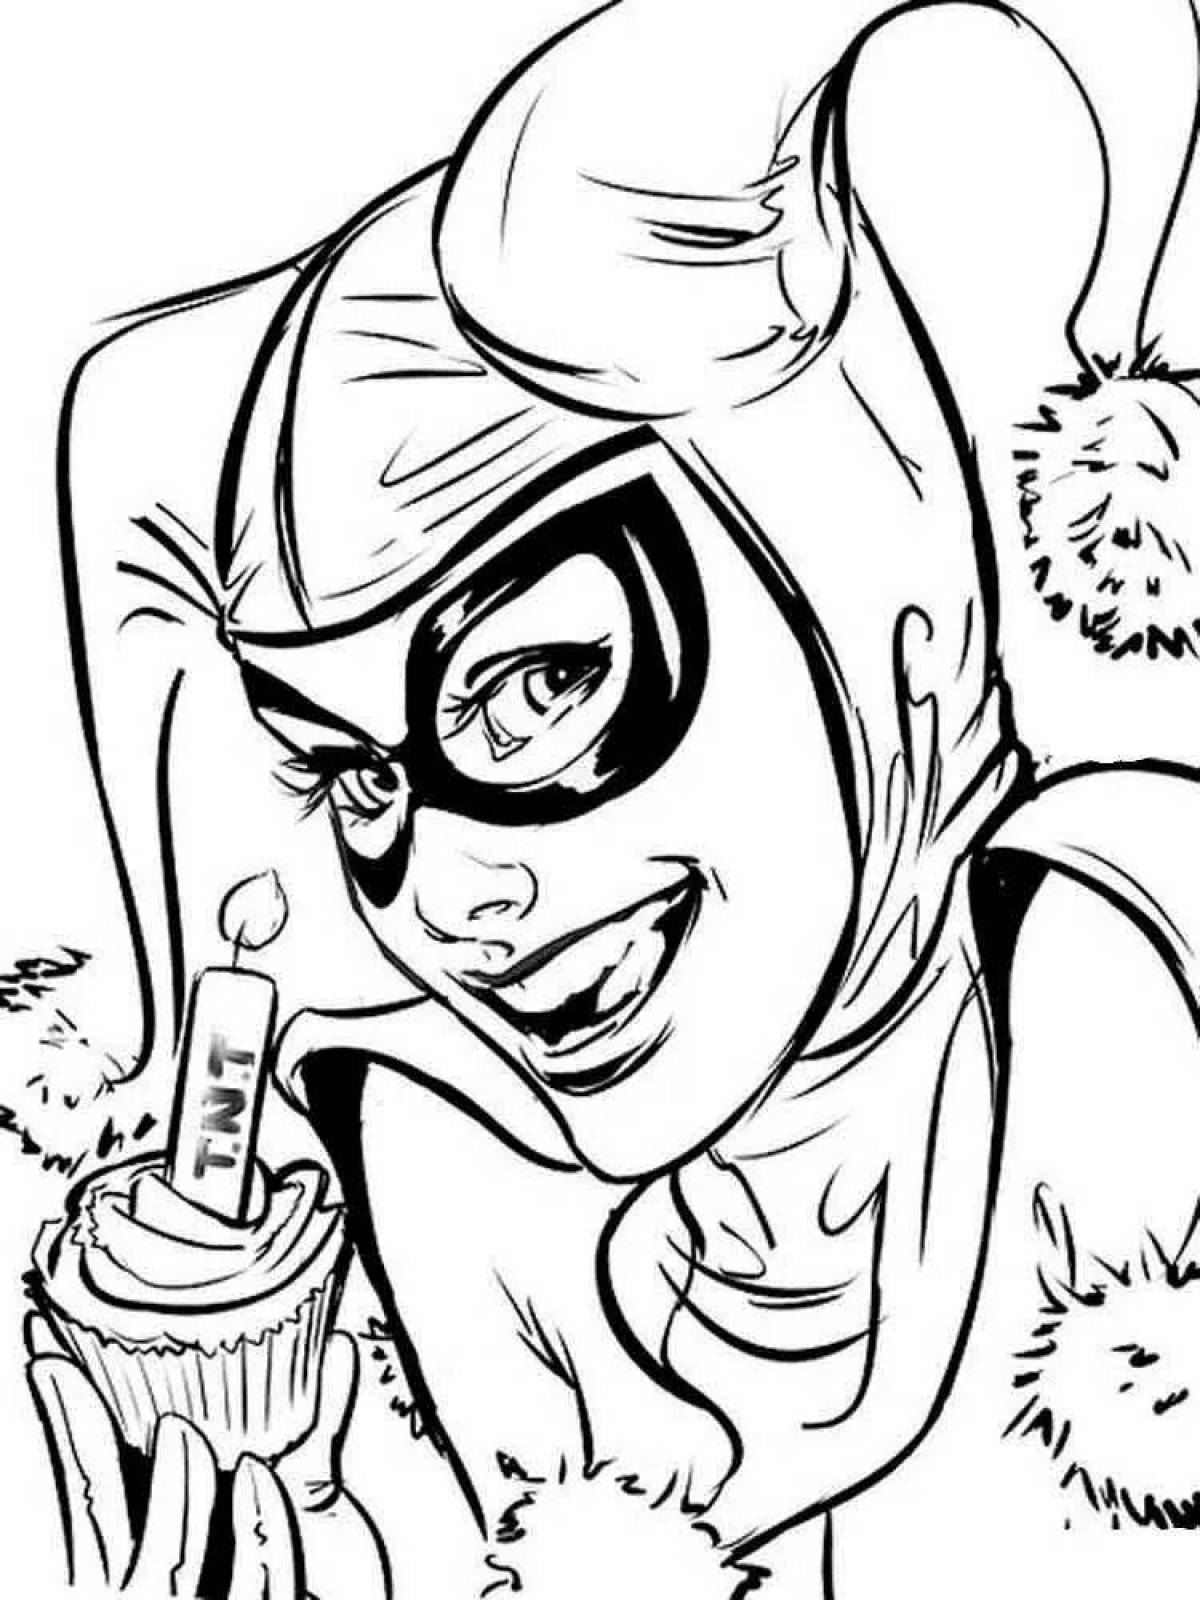 Adorable Joker and Harley Quinn coloring book